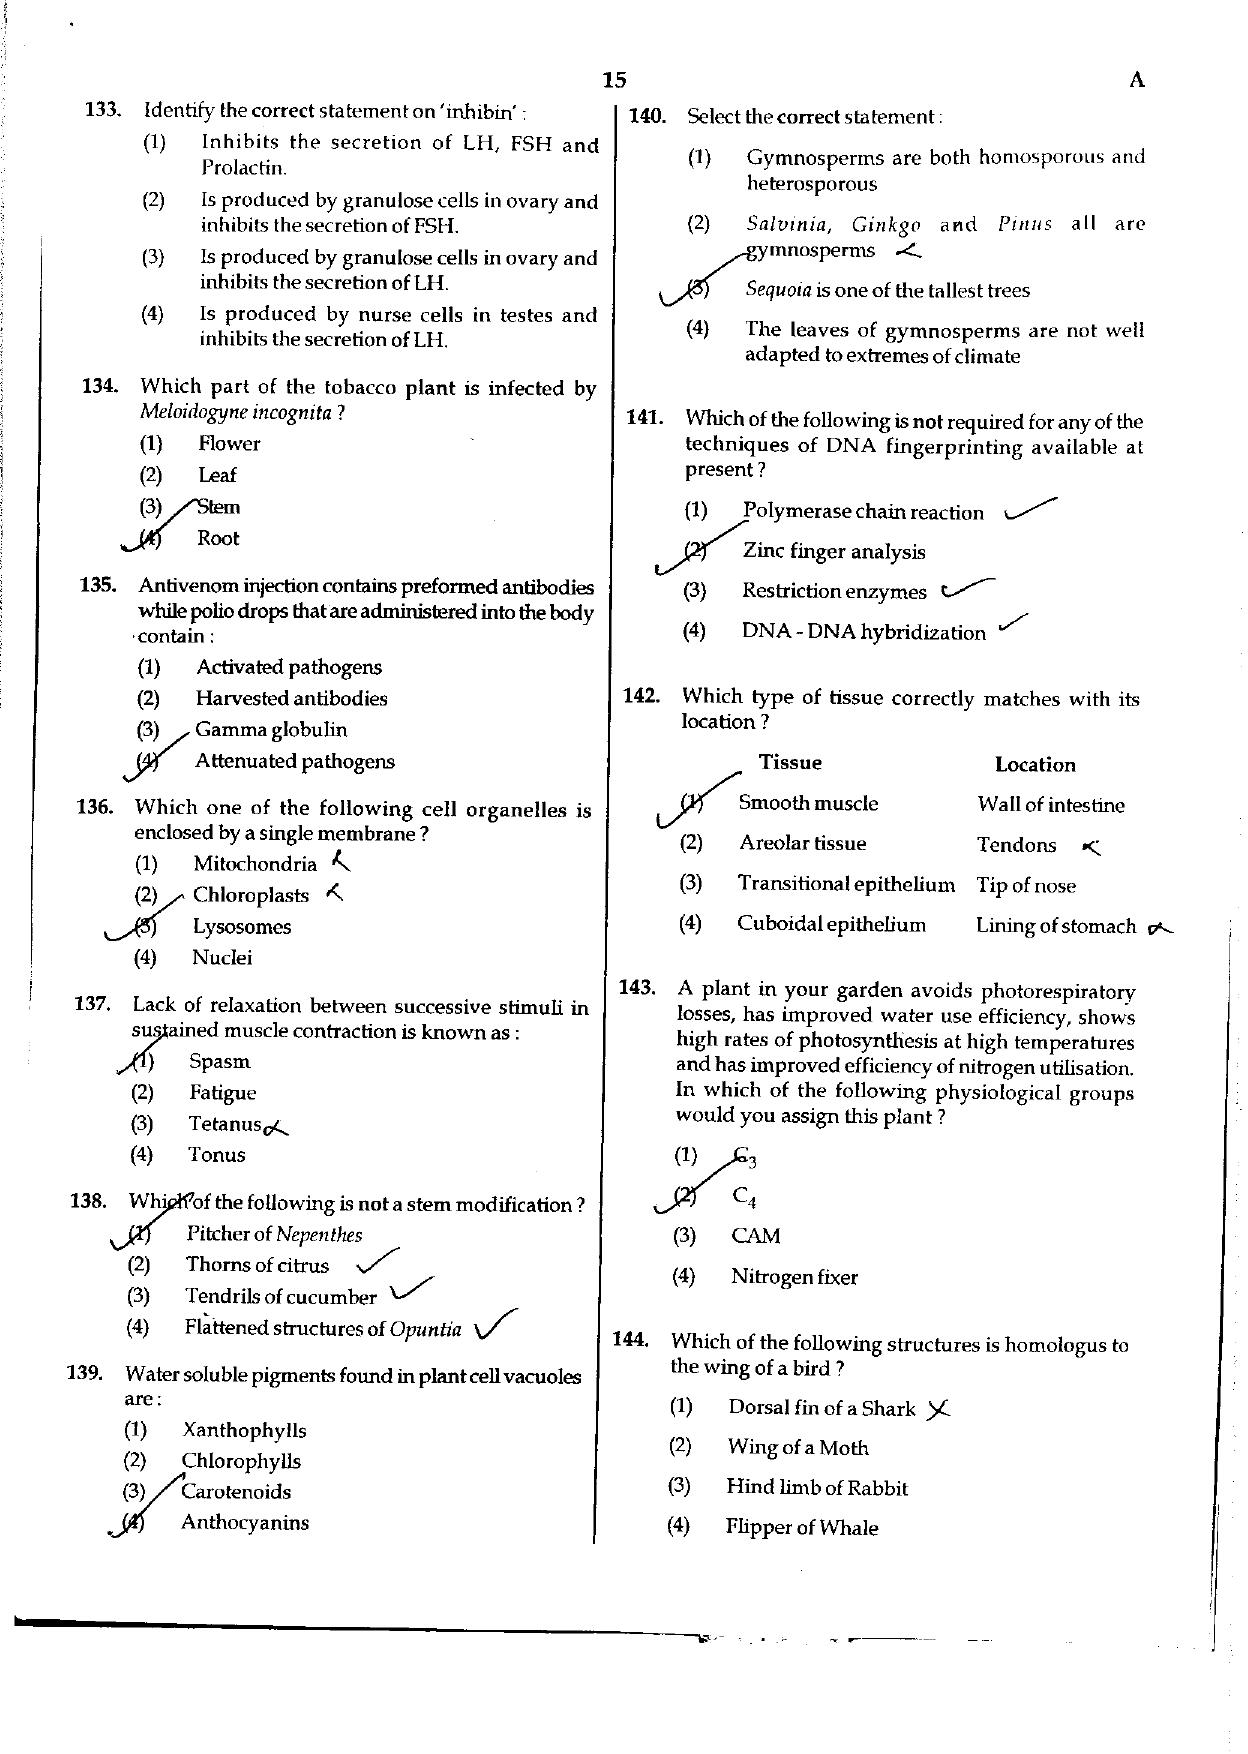 NEET Code A/ P/ W 2016 Question Paper - Page 15